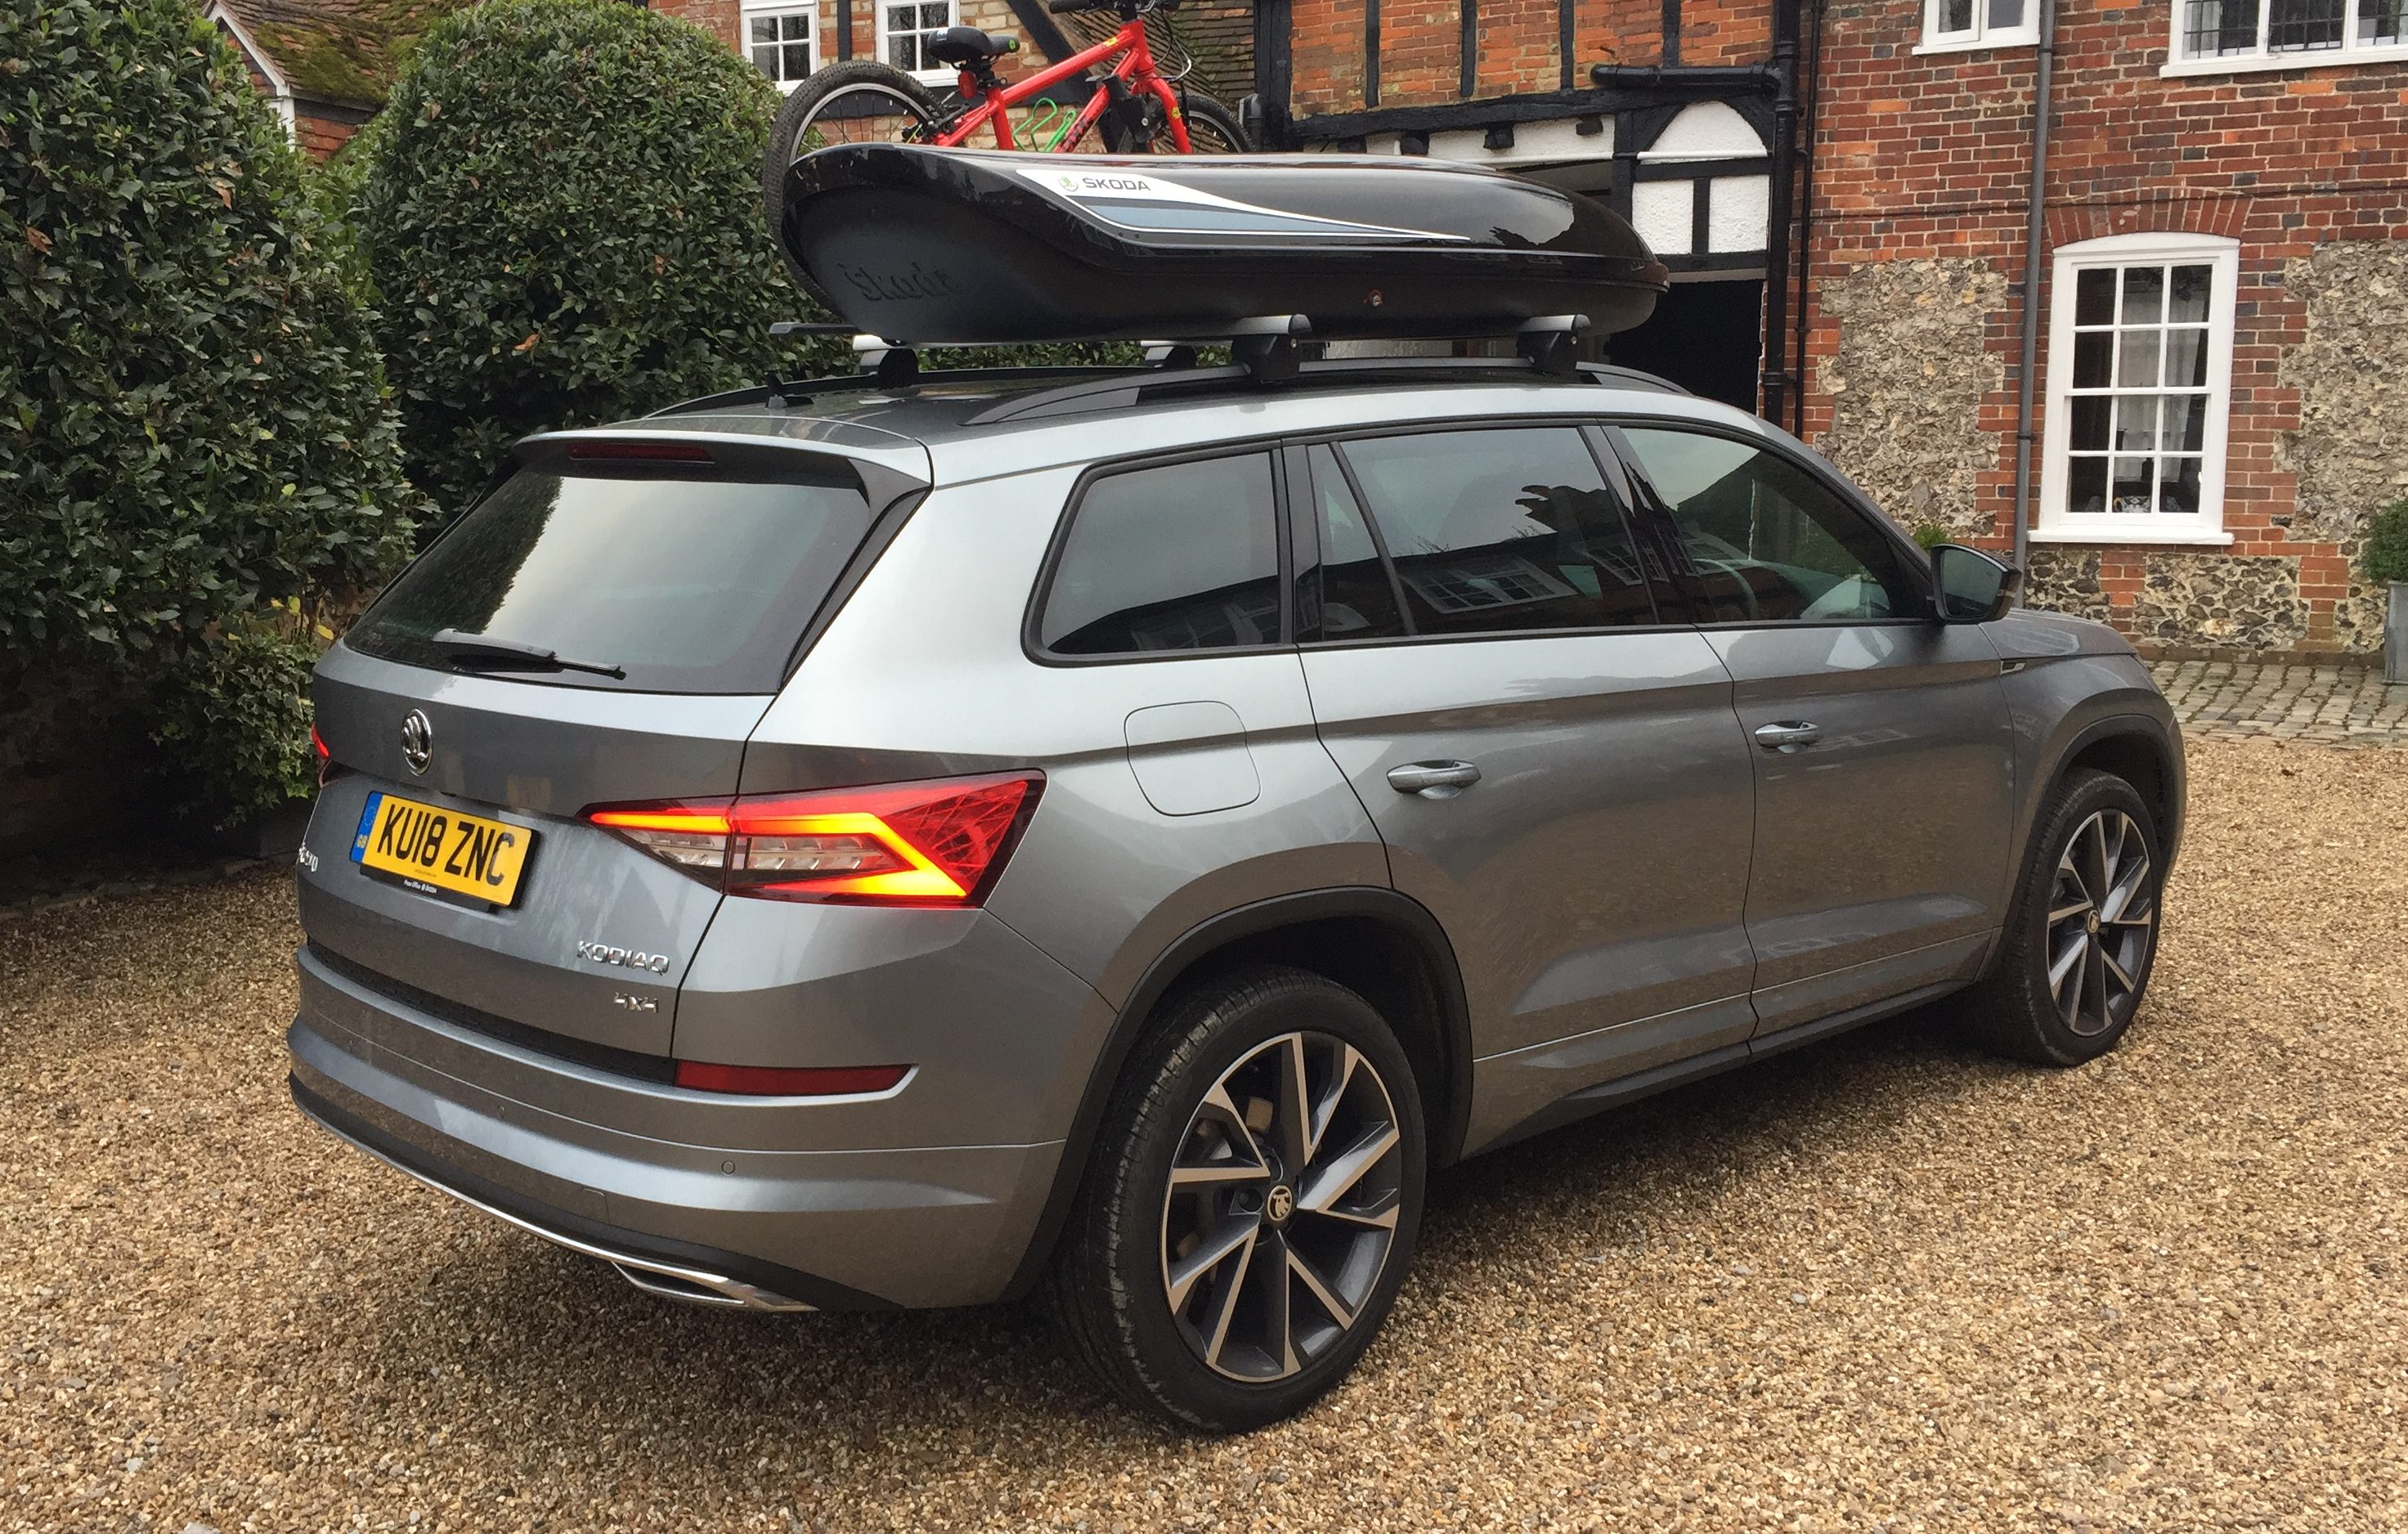 Skoda Kodiaq 4x4 long-term review road test by James Mills for Sunday Times Driving.co.uk